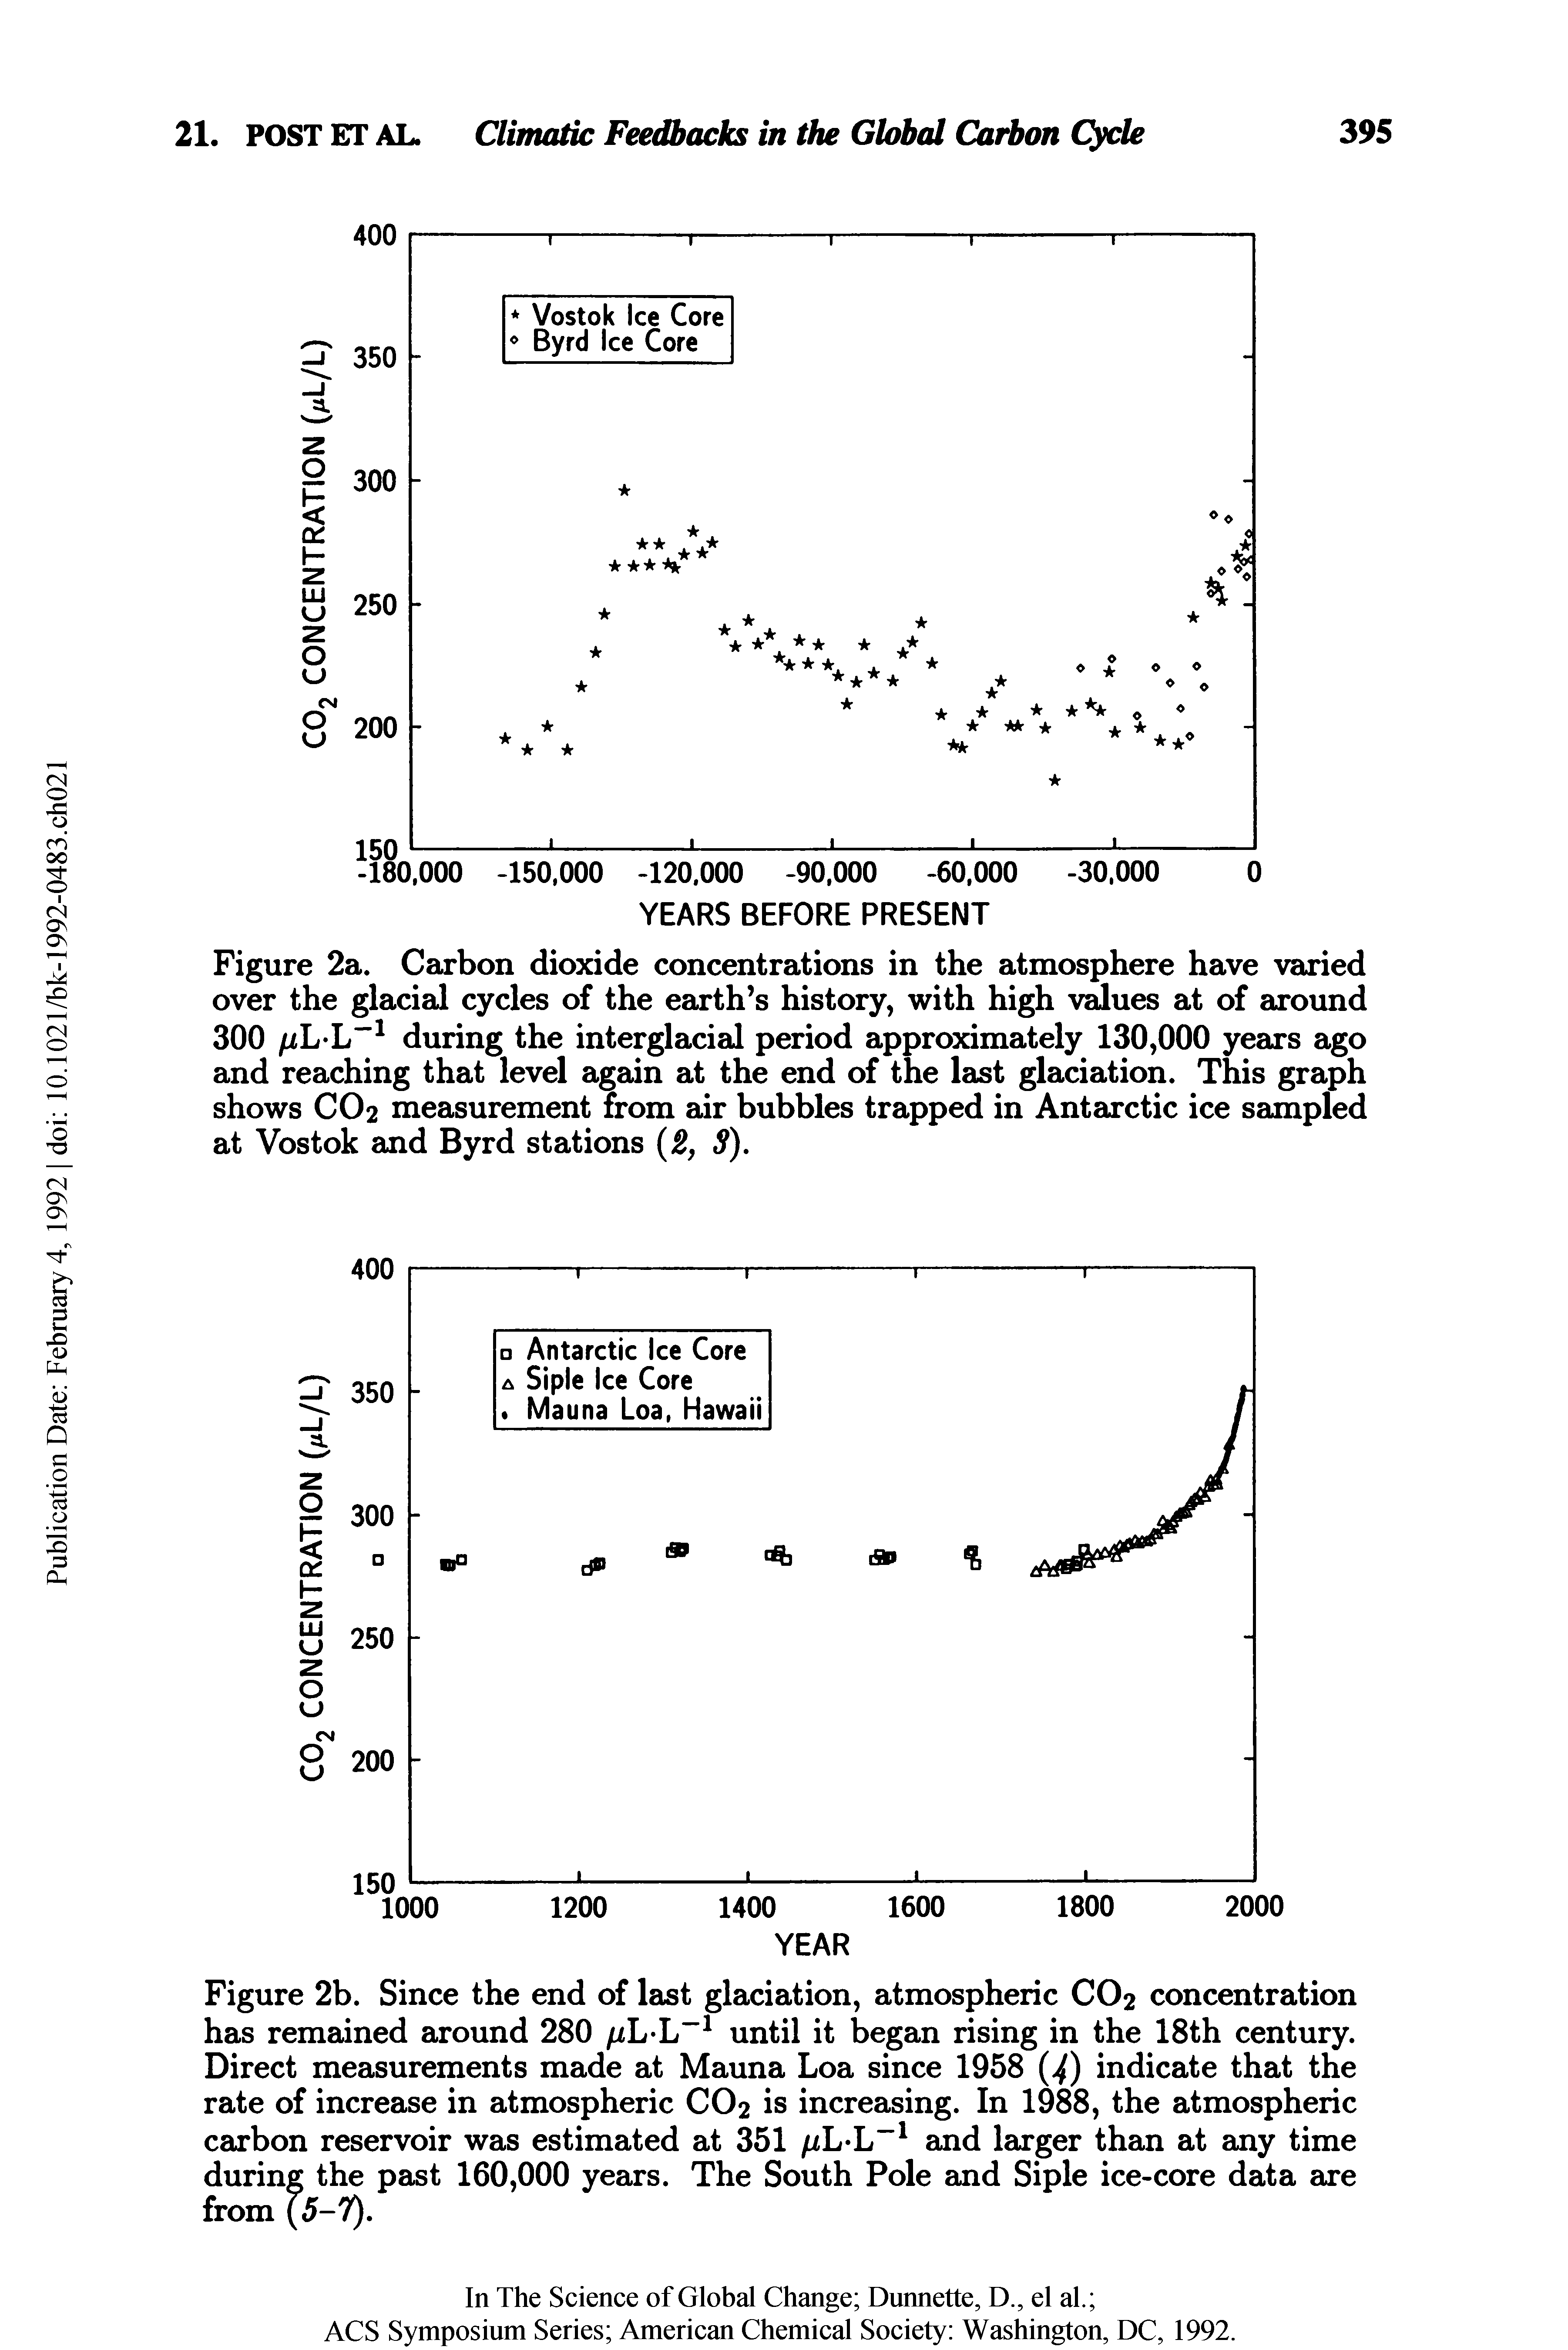 Figure 2b. Since the end of last glaciation, atmospheric CO2 concentration has remained around 280 until it began rising in the 18th century.